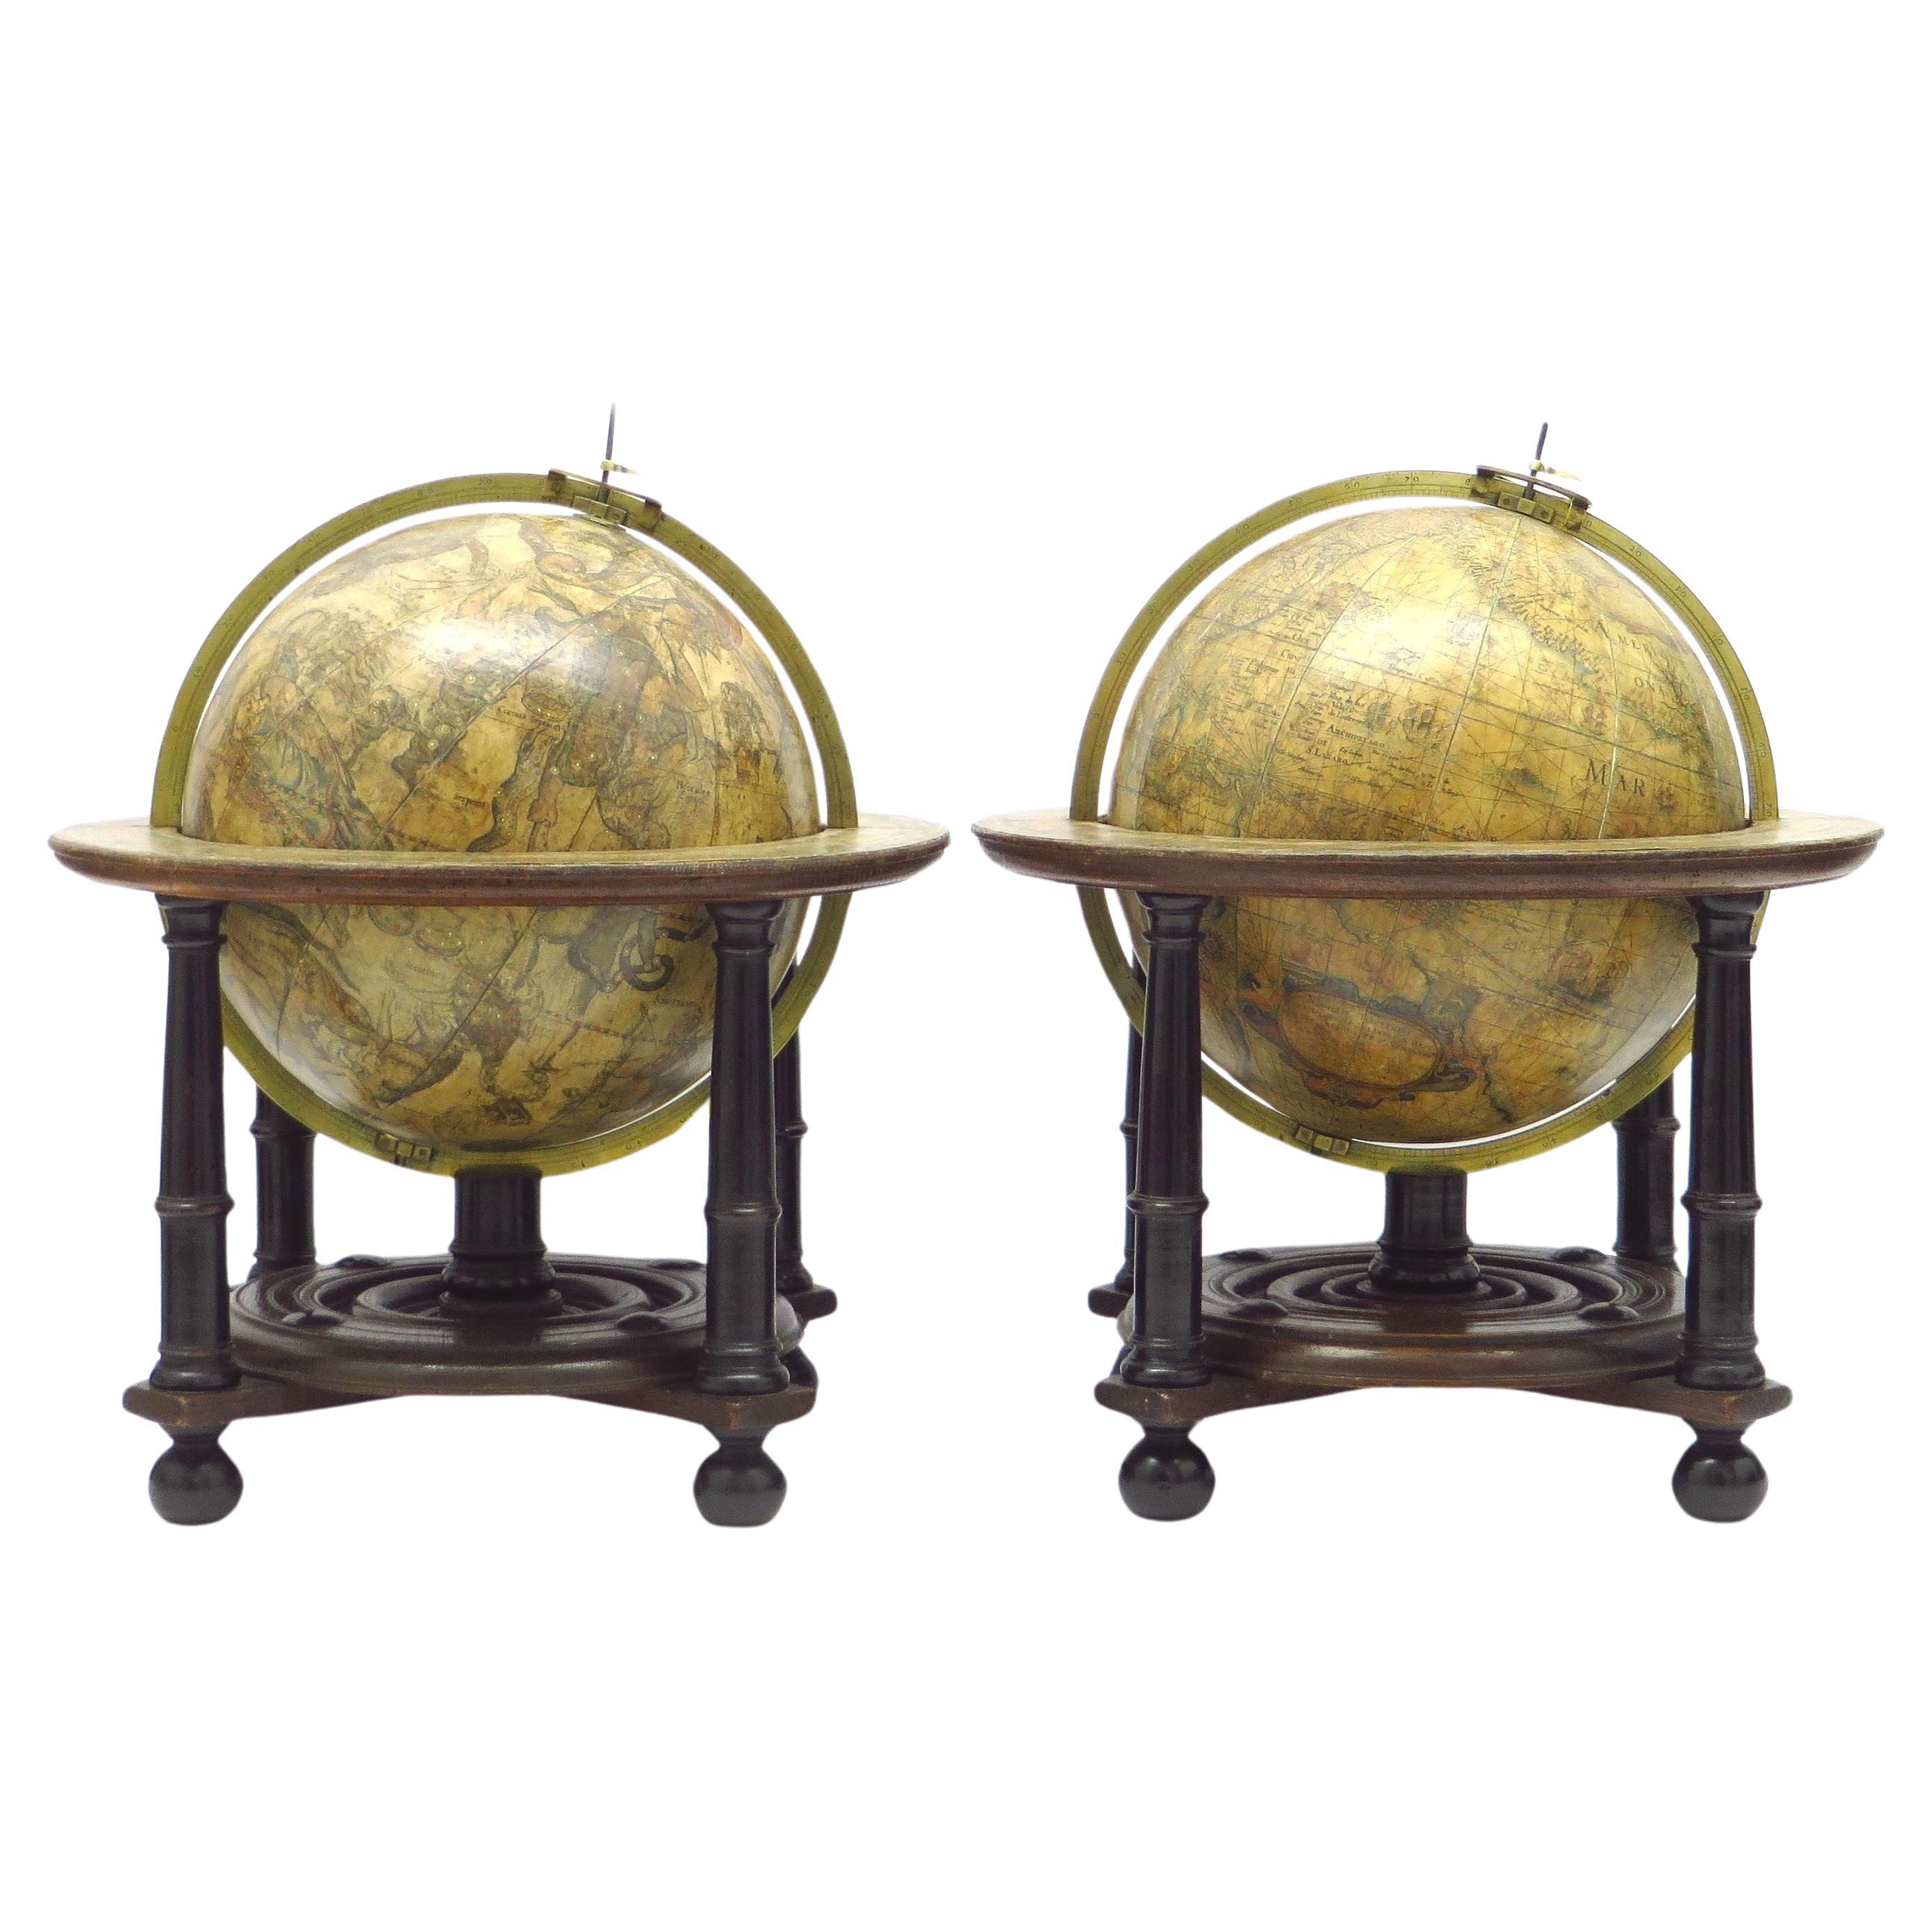         An exceptional pair of BLAEU table globes